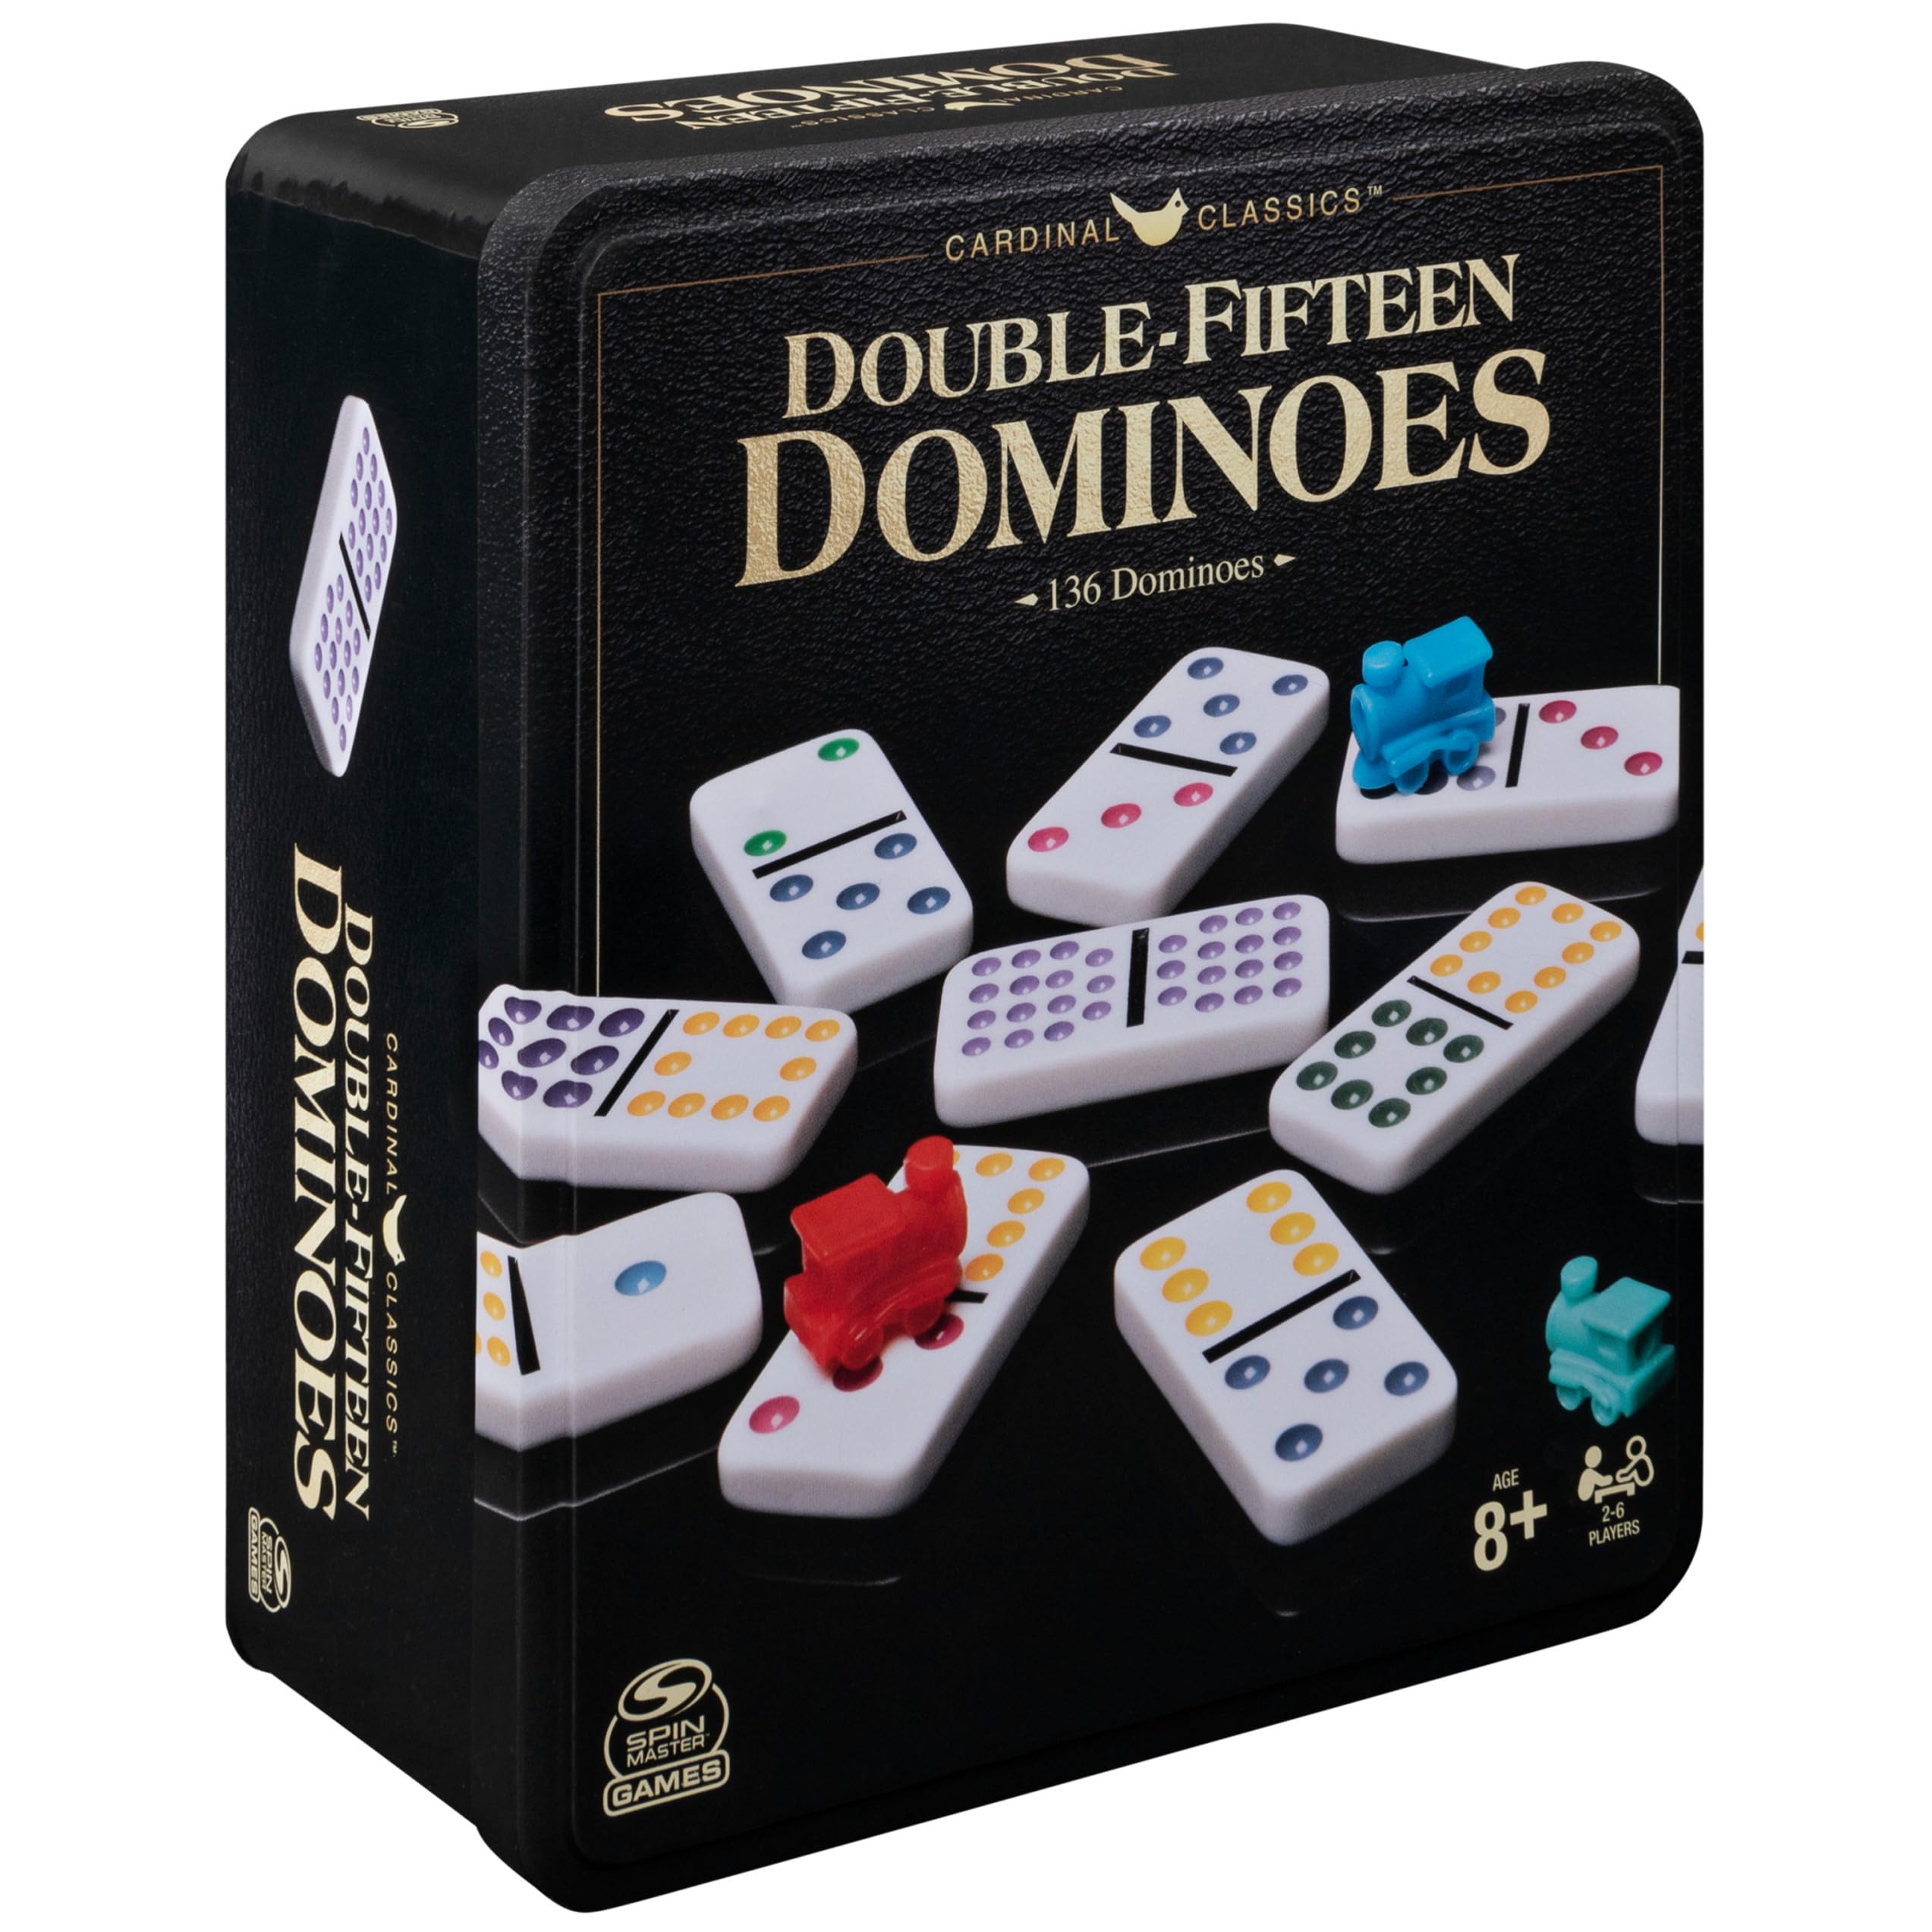 136-Count Cardinal Classics Double Fifteen Dominoes Set in Storage Tin (Double Line 15) $7.14 + Free Shipping w/ Prime or on $35+